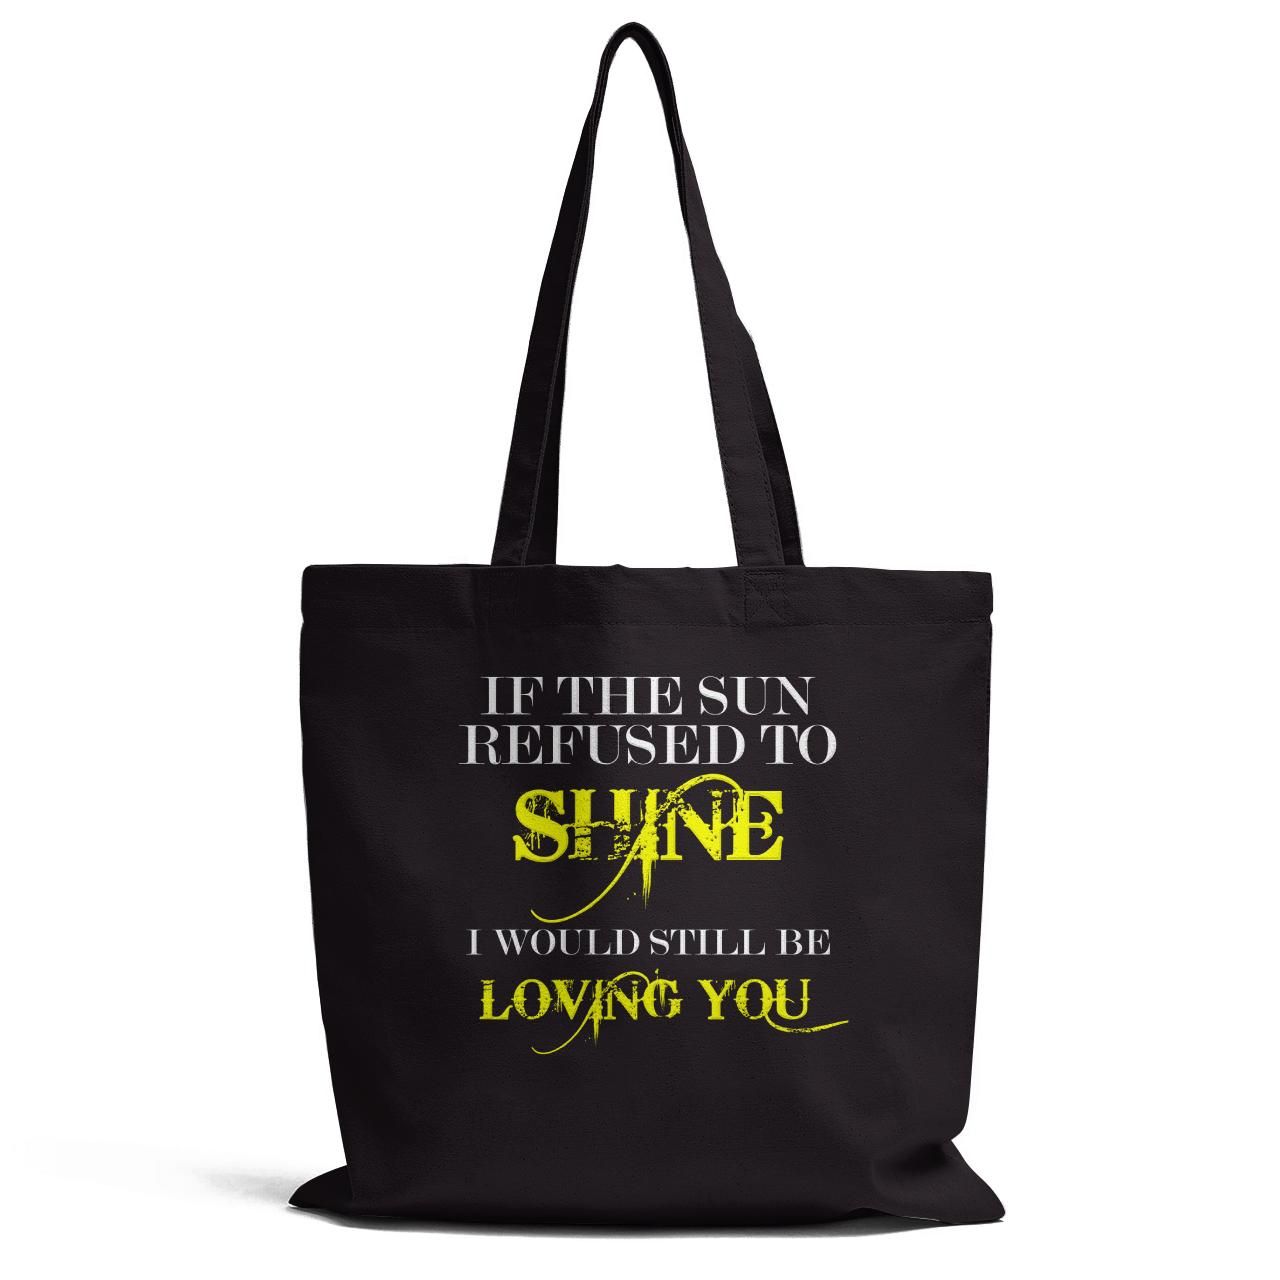 Is The Sun Refused To Shine I Would Still Be Loving You Tote Bag